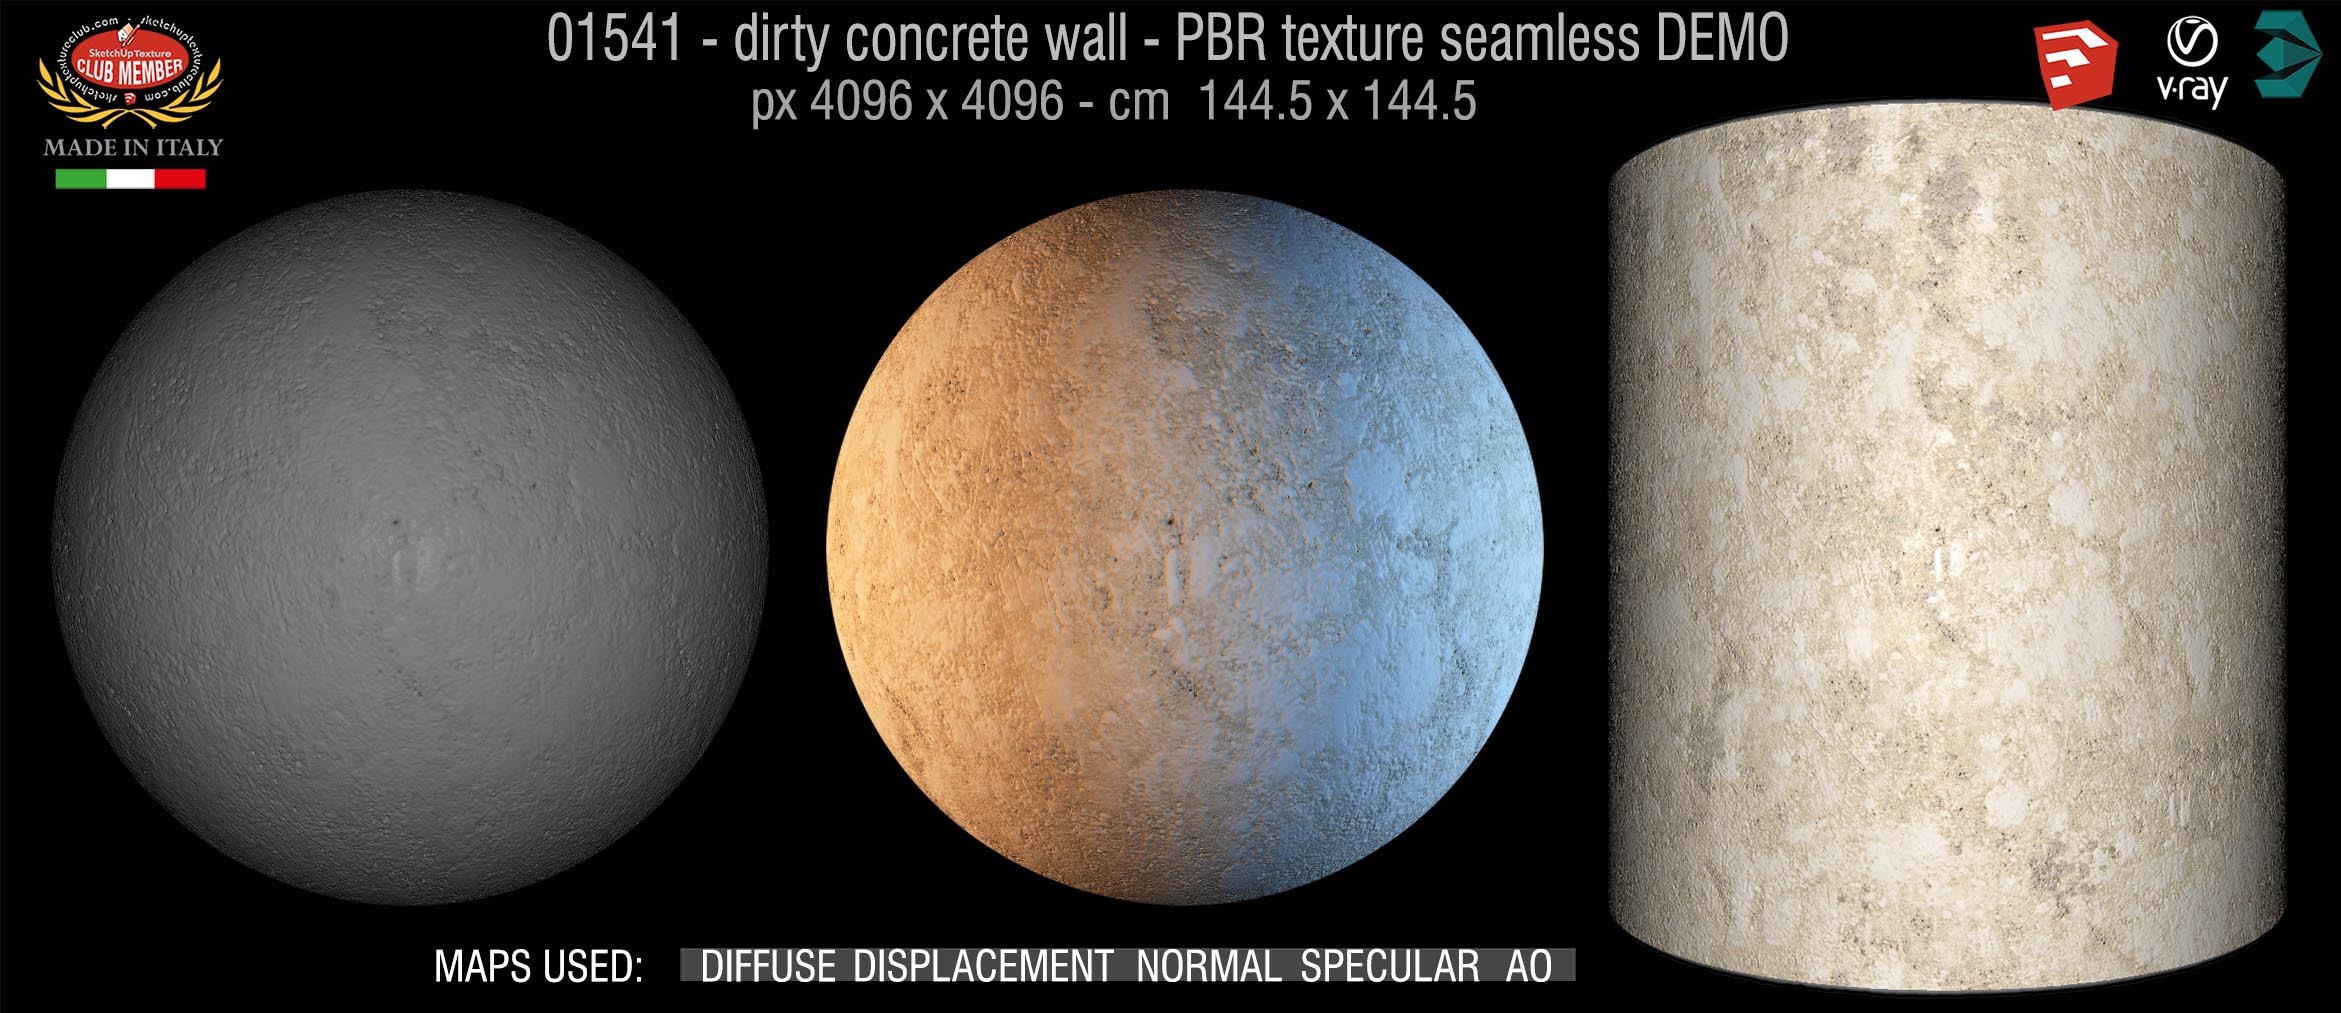 01541 dirty concrete wall PBR texture seamless DEMO